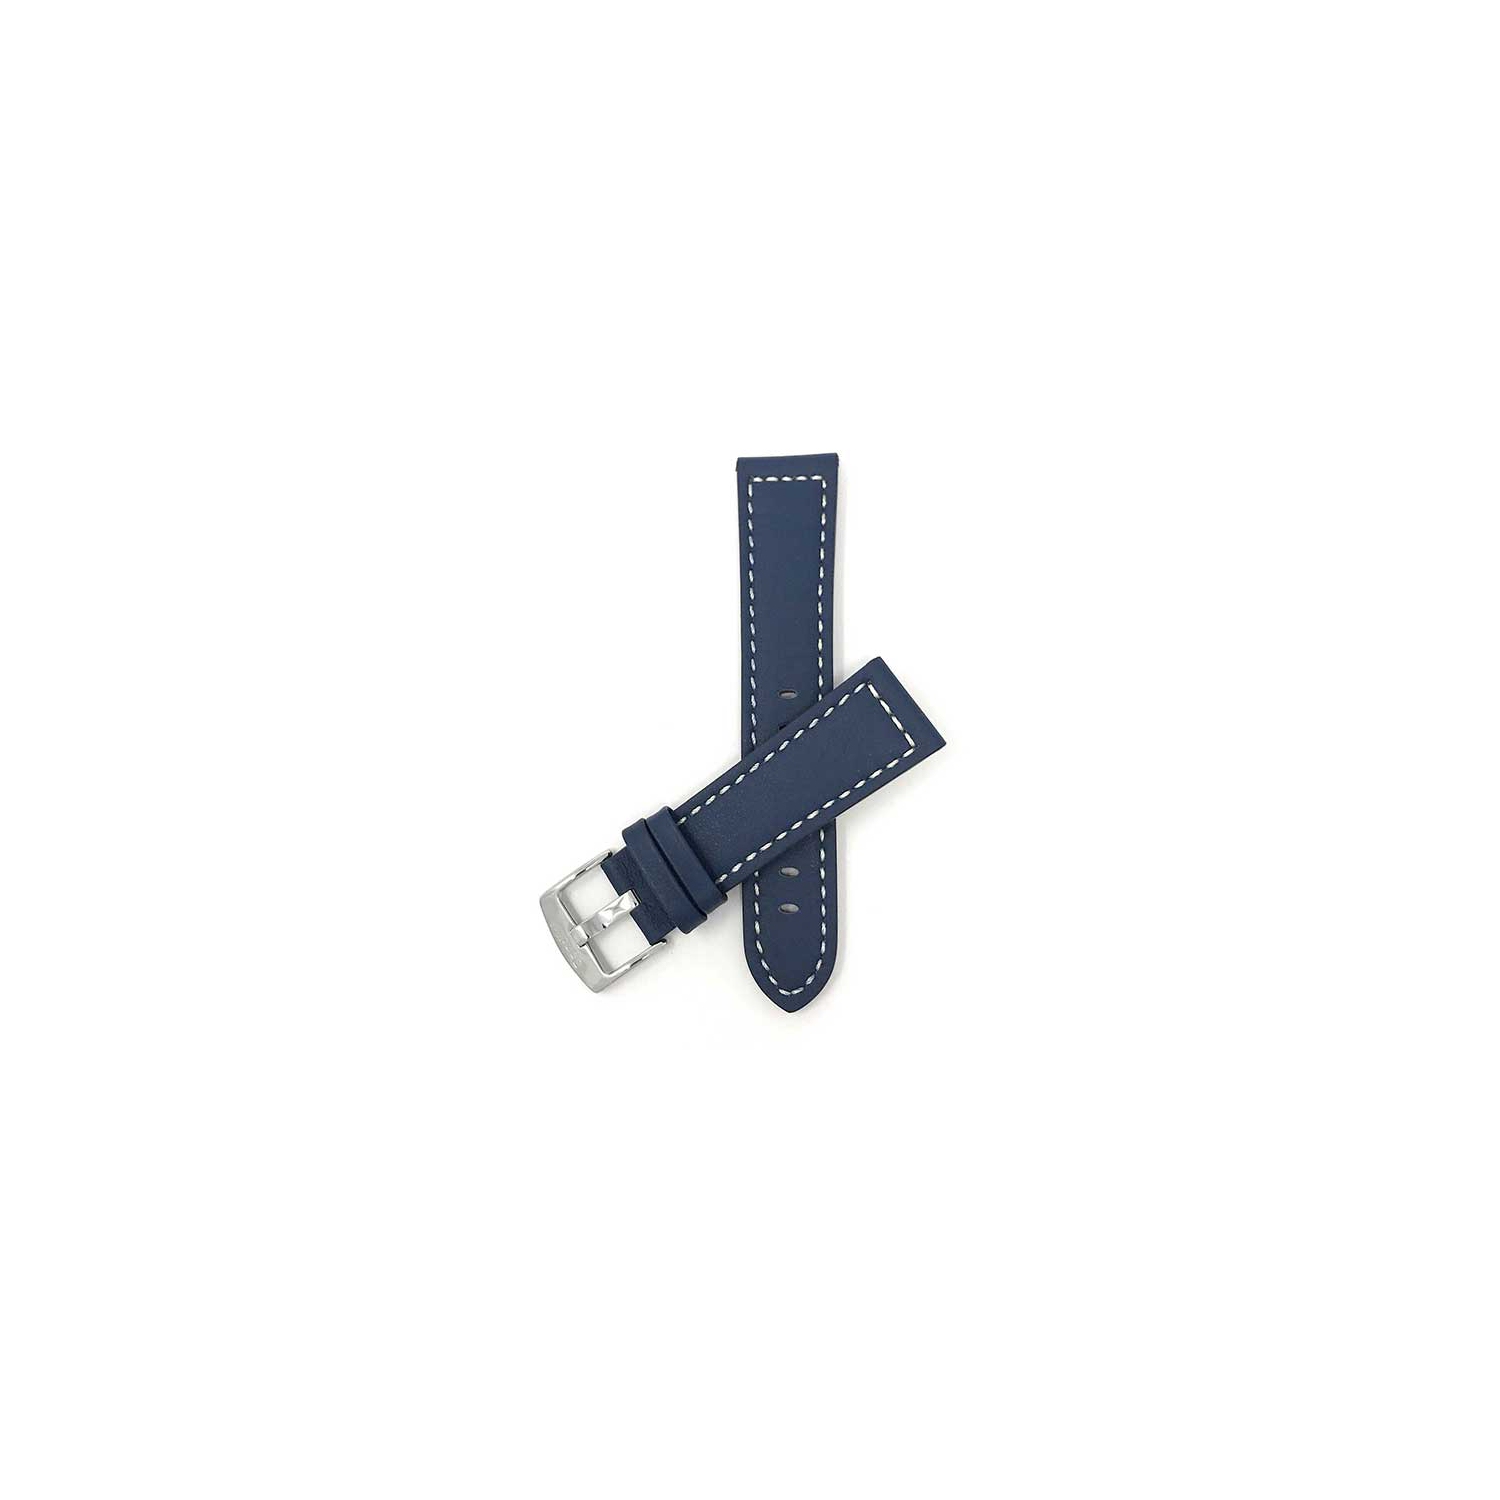 Bandini Thick Leather Racer Smartwatch Strap, White Stitch For Michael Kors MKGO - 20mm, Blue / Silver Buckle